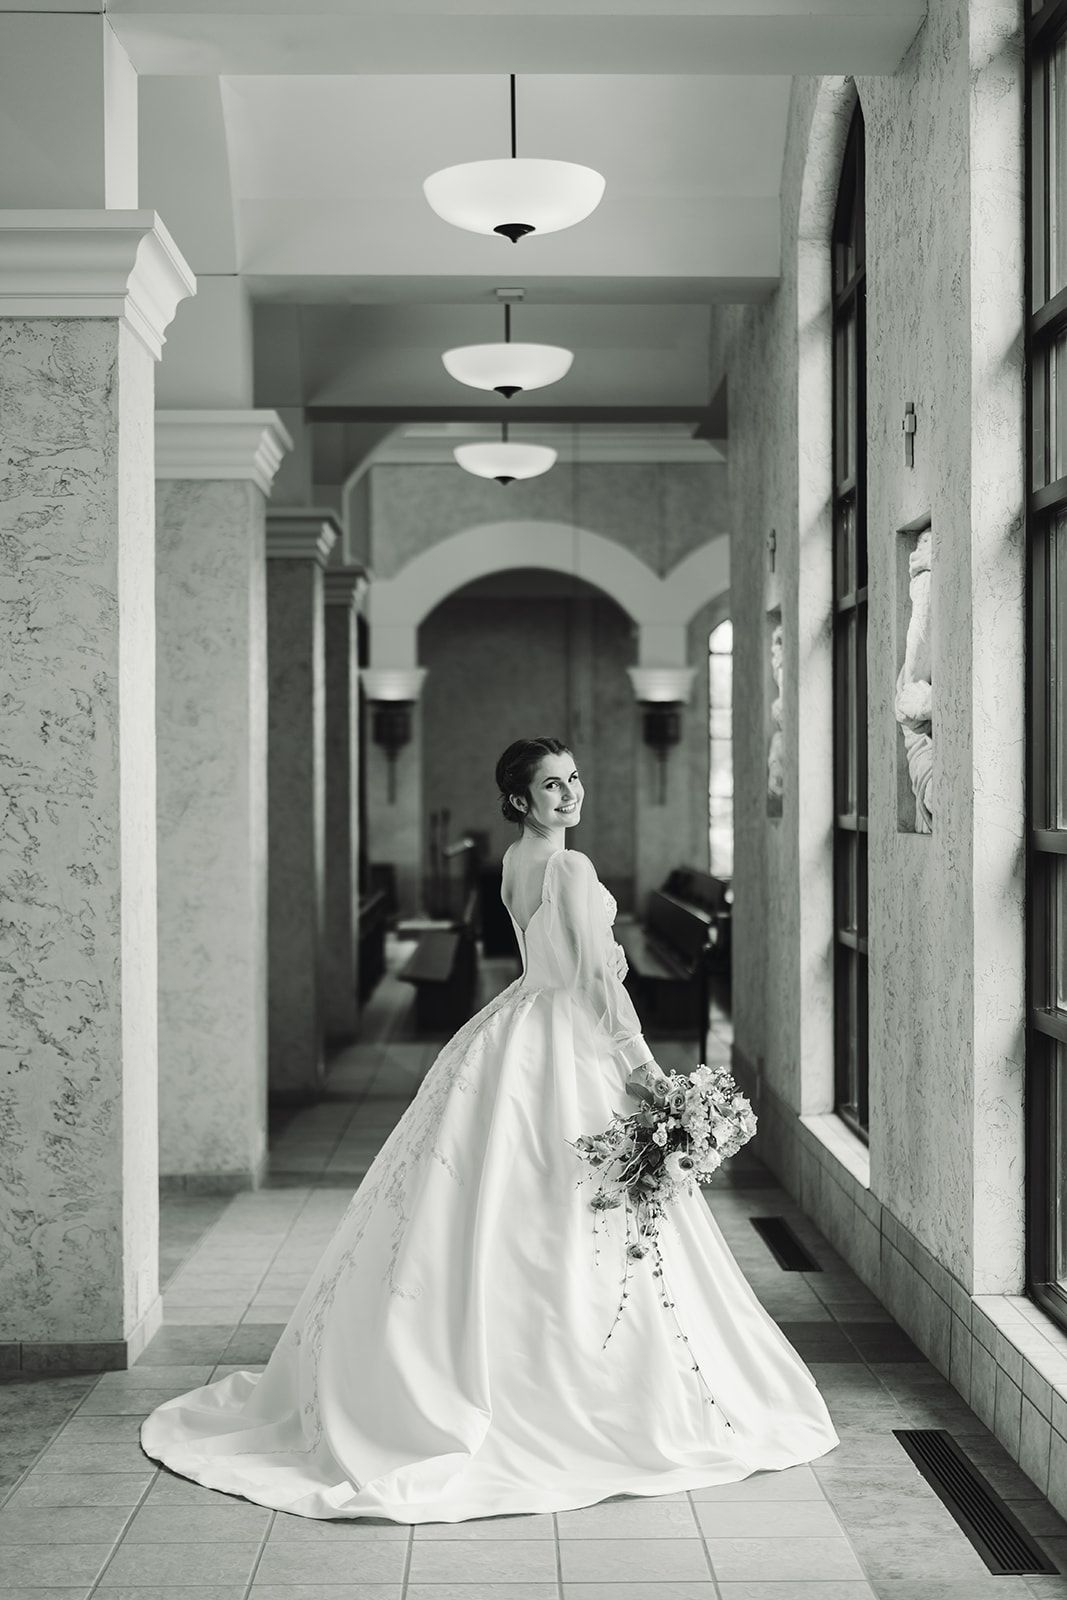 A bride in a wedding dress is standing in a hallway holding a bouquet of flowers.